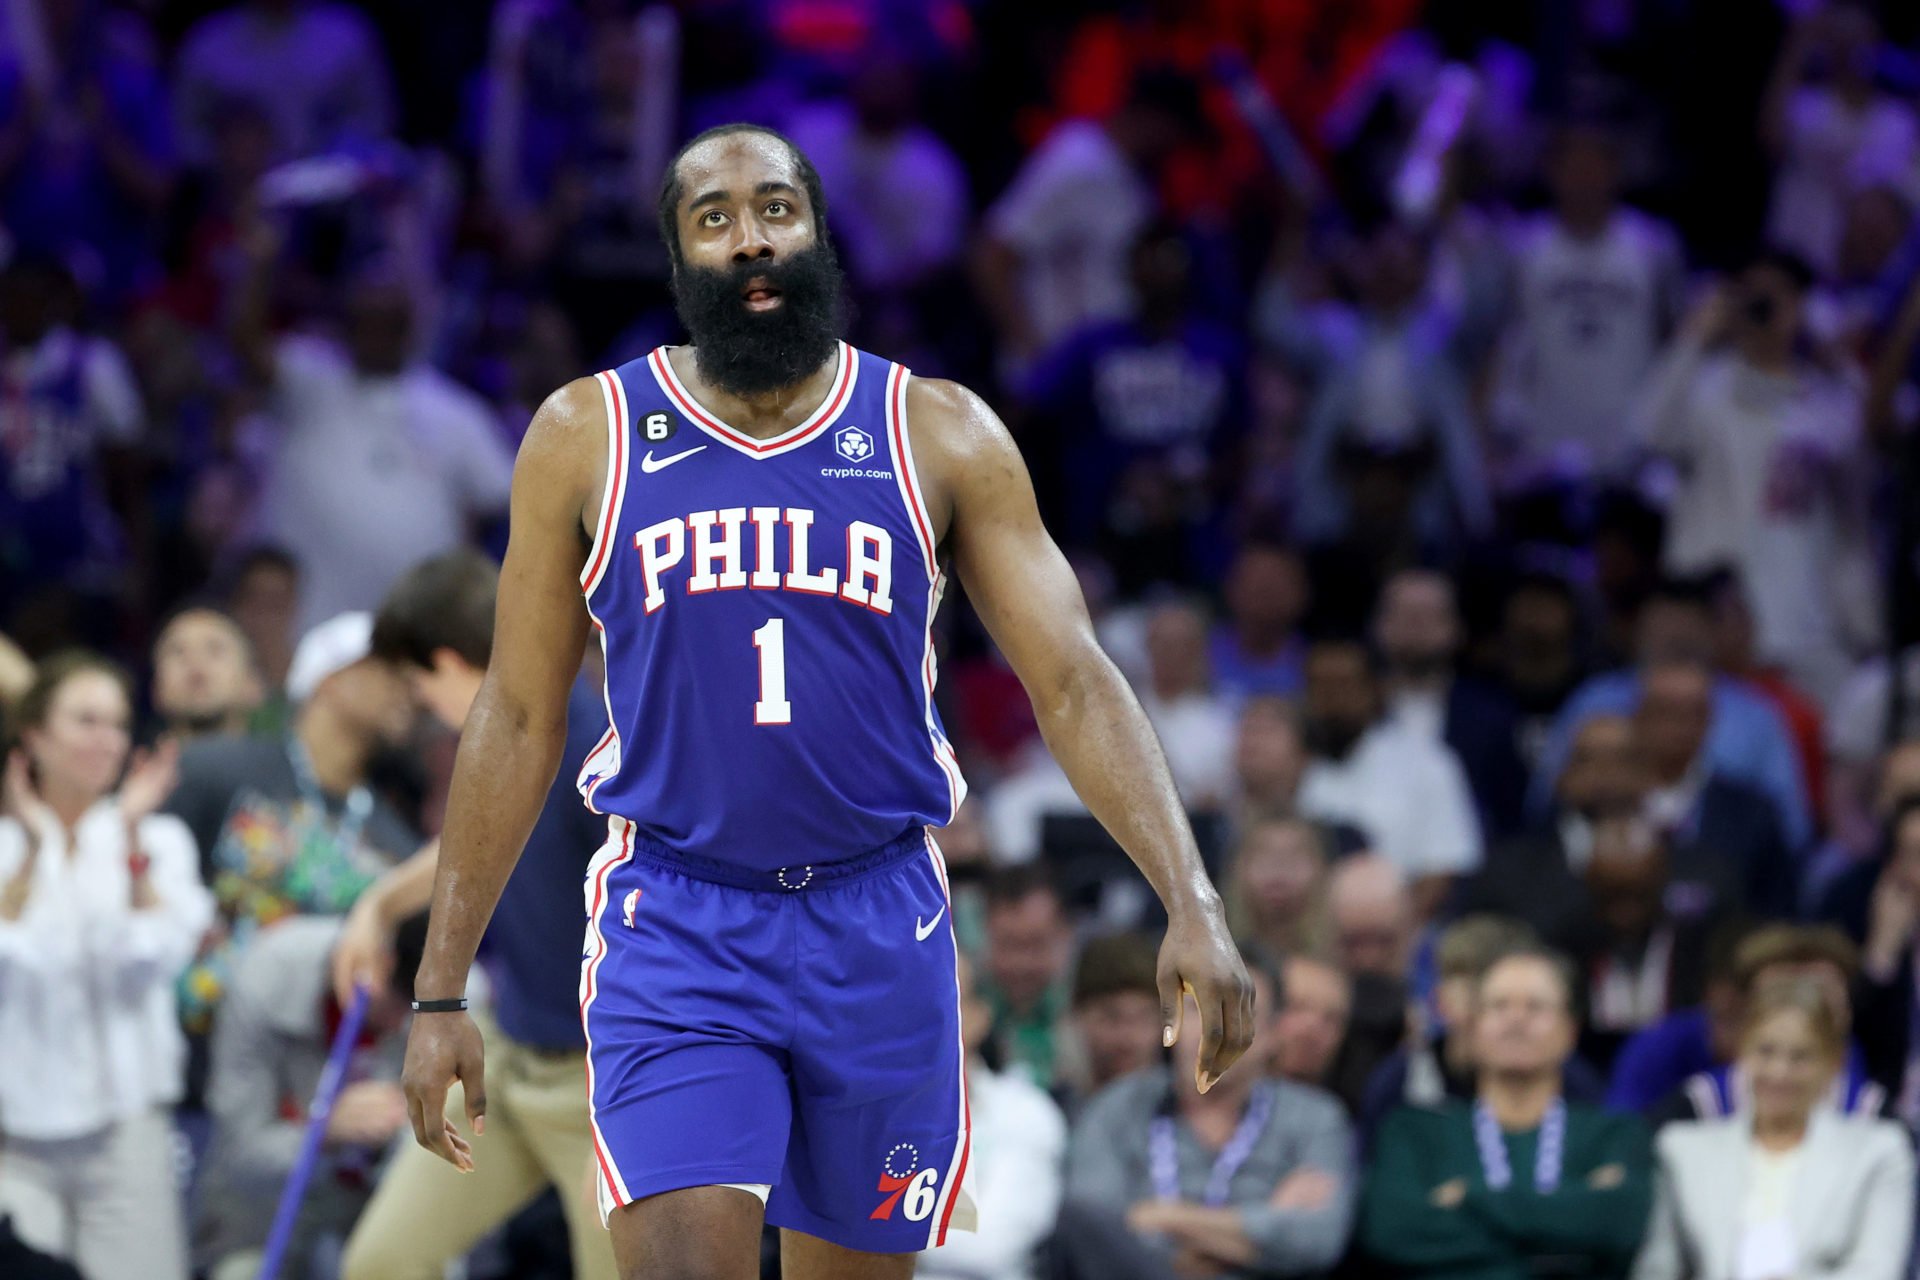 Image Of James Harden Partying In Club Shirtless Go Viral After